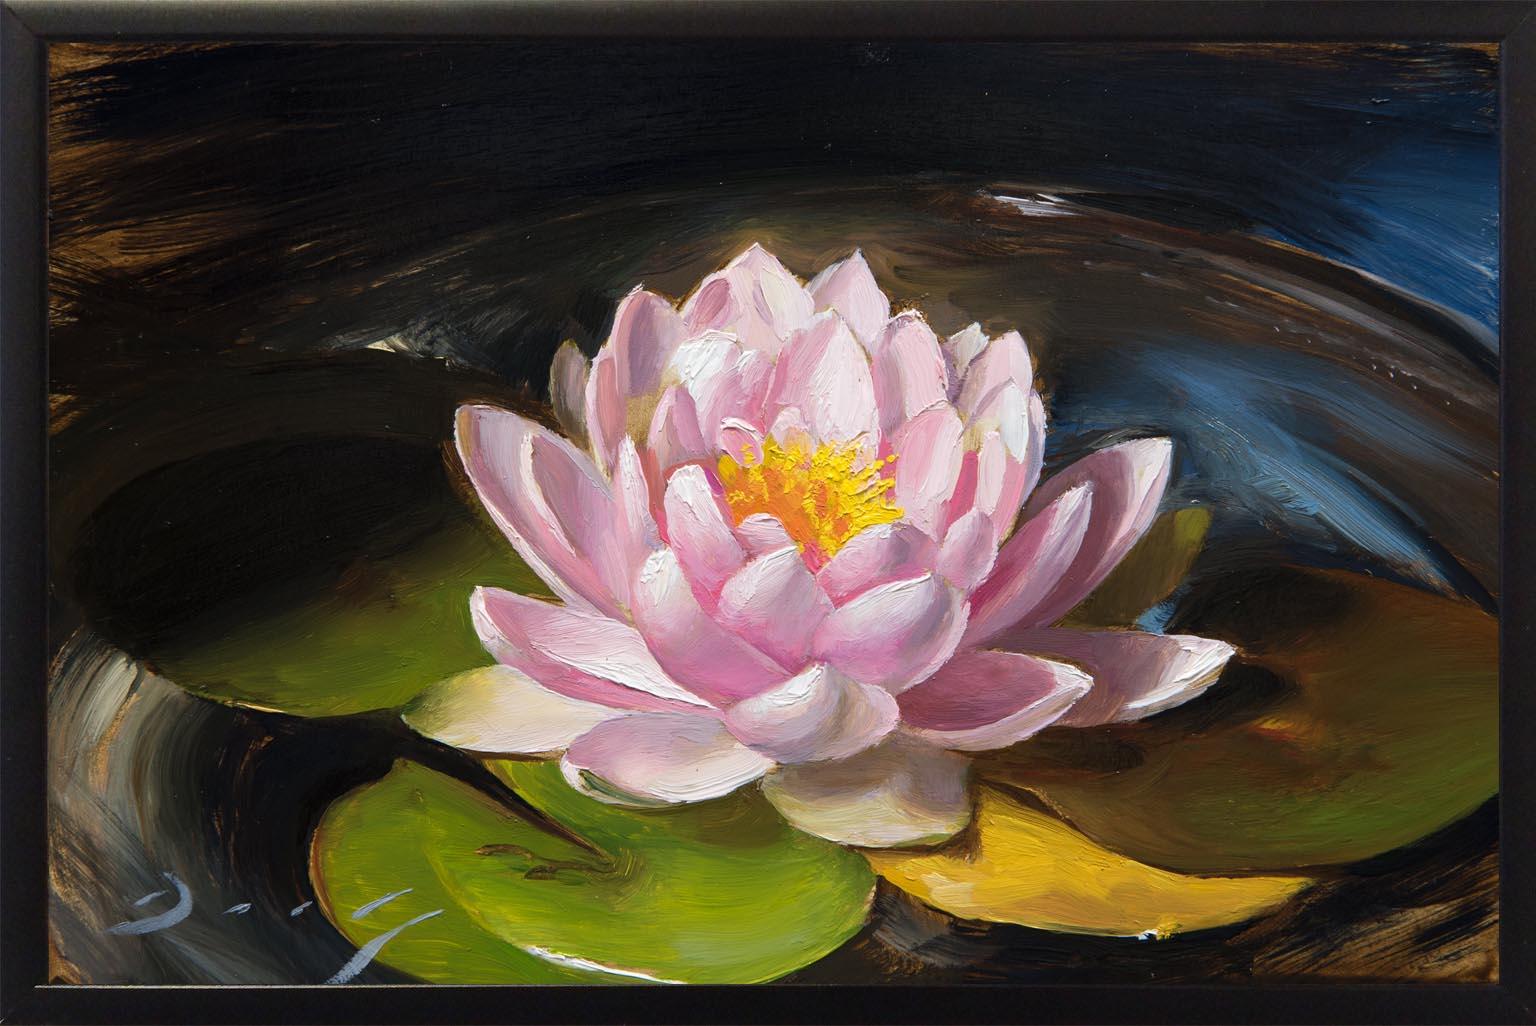 Realist pink white and yellow flower, 